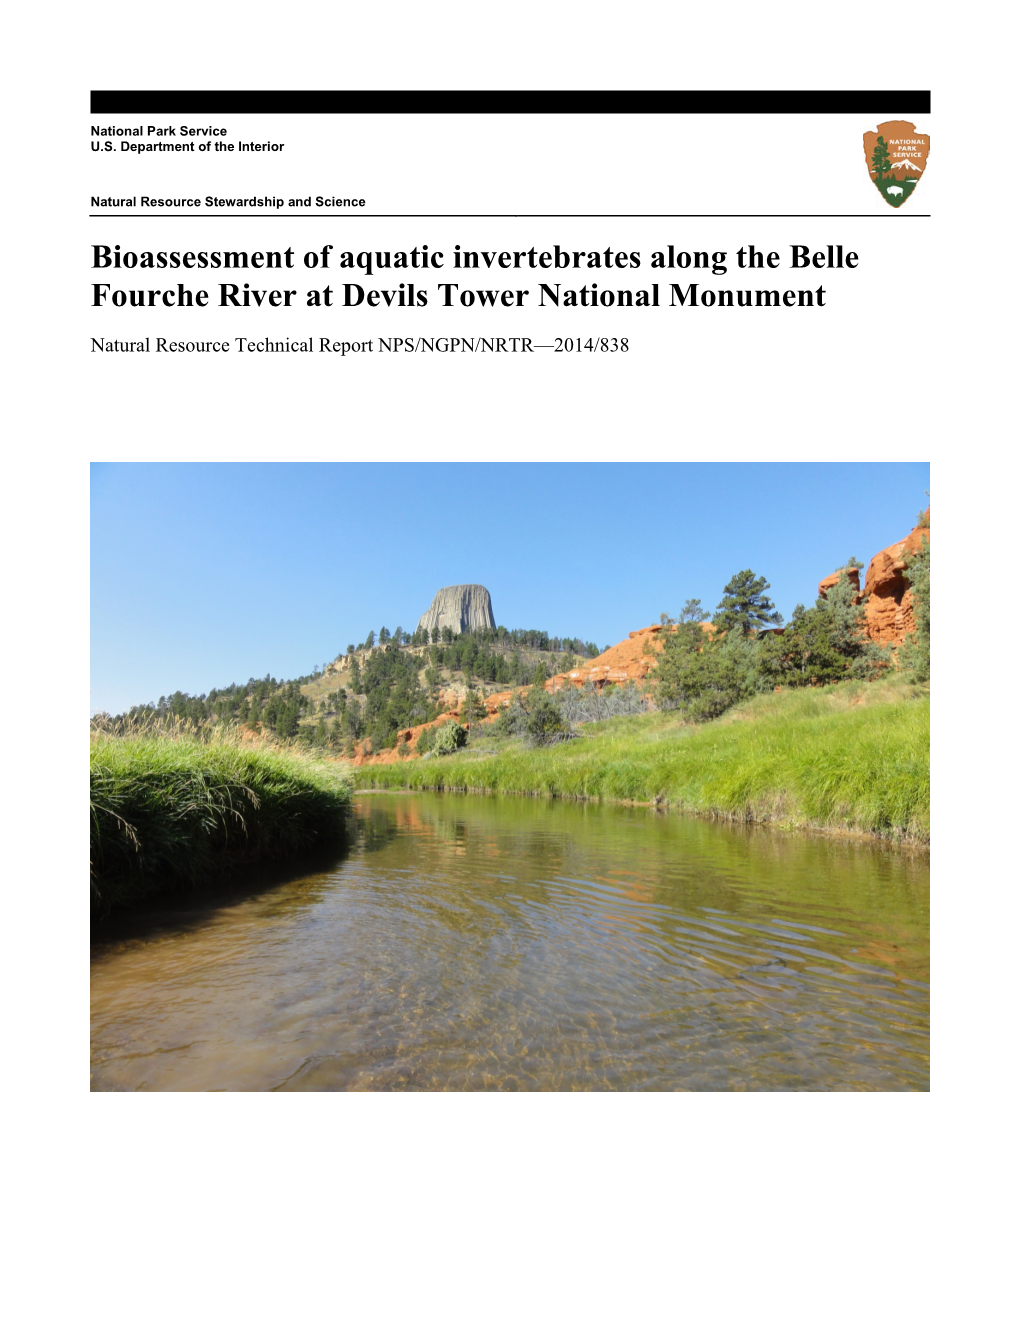 Bioassessment of Aquatic Invertebrates Along the Belle Fourche River at Devils Tower National Monument